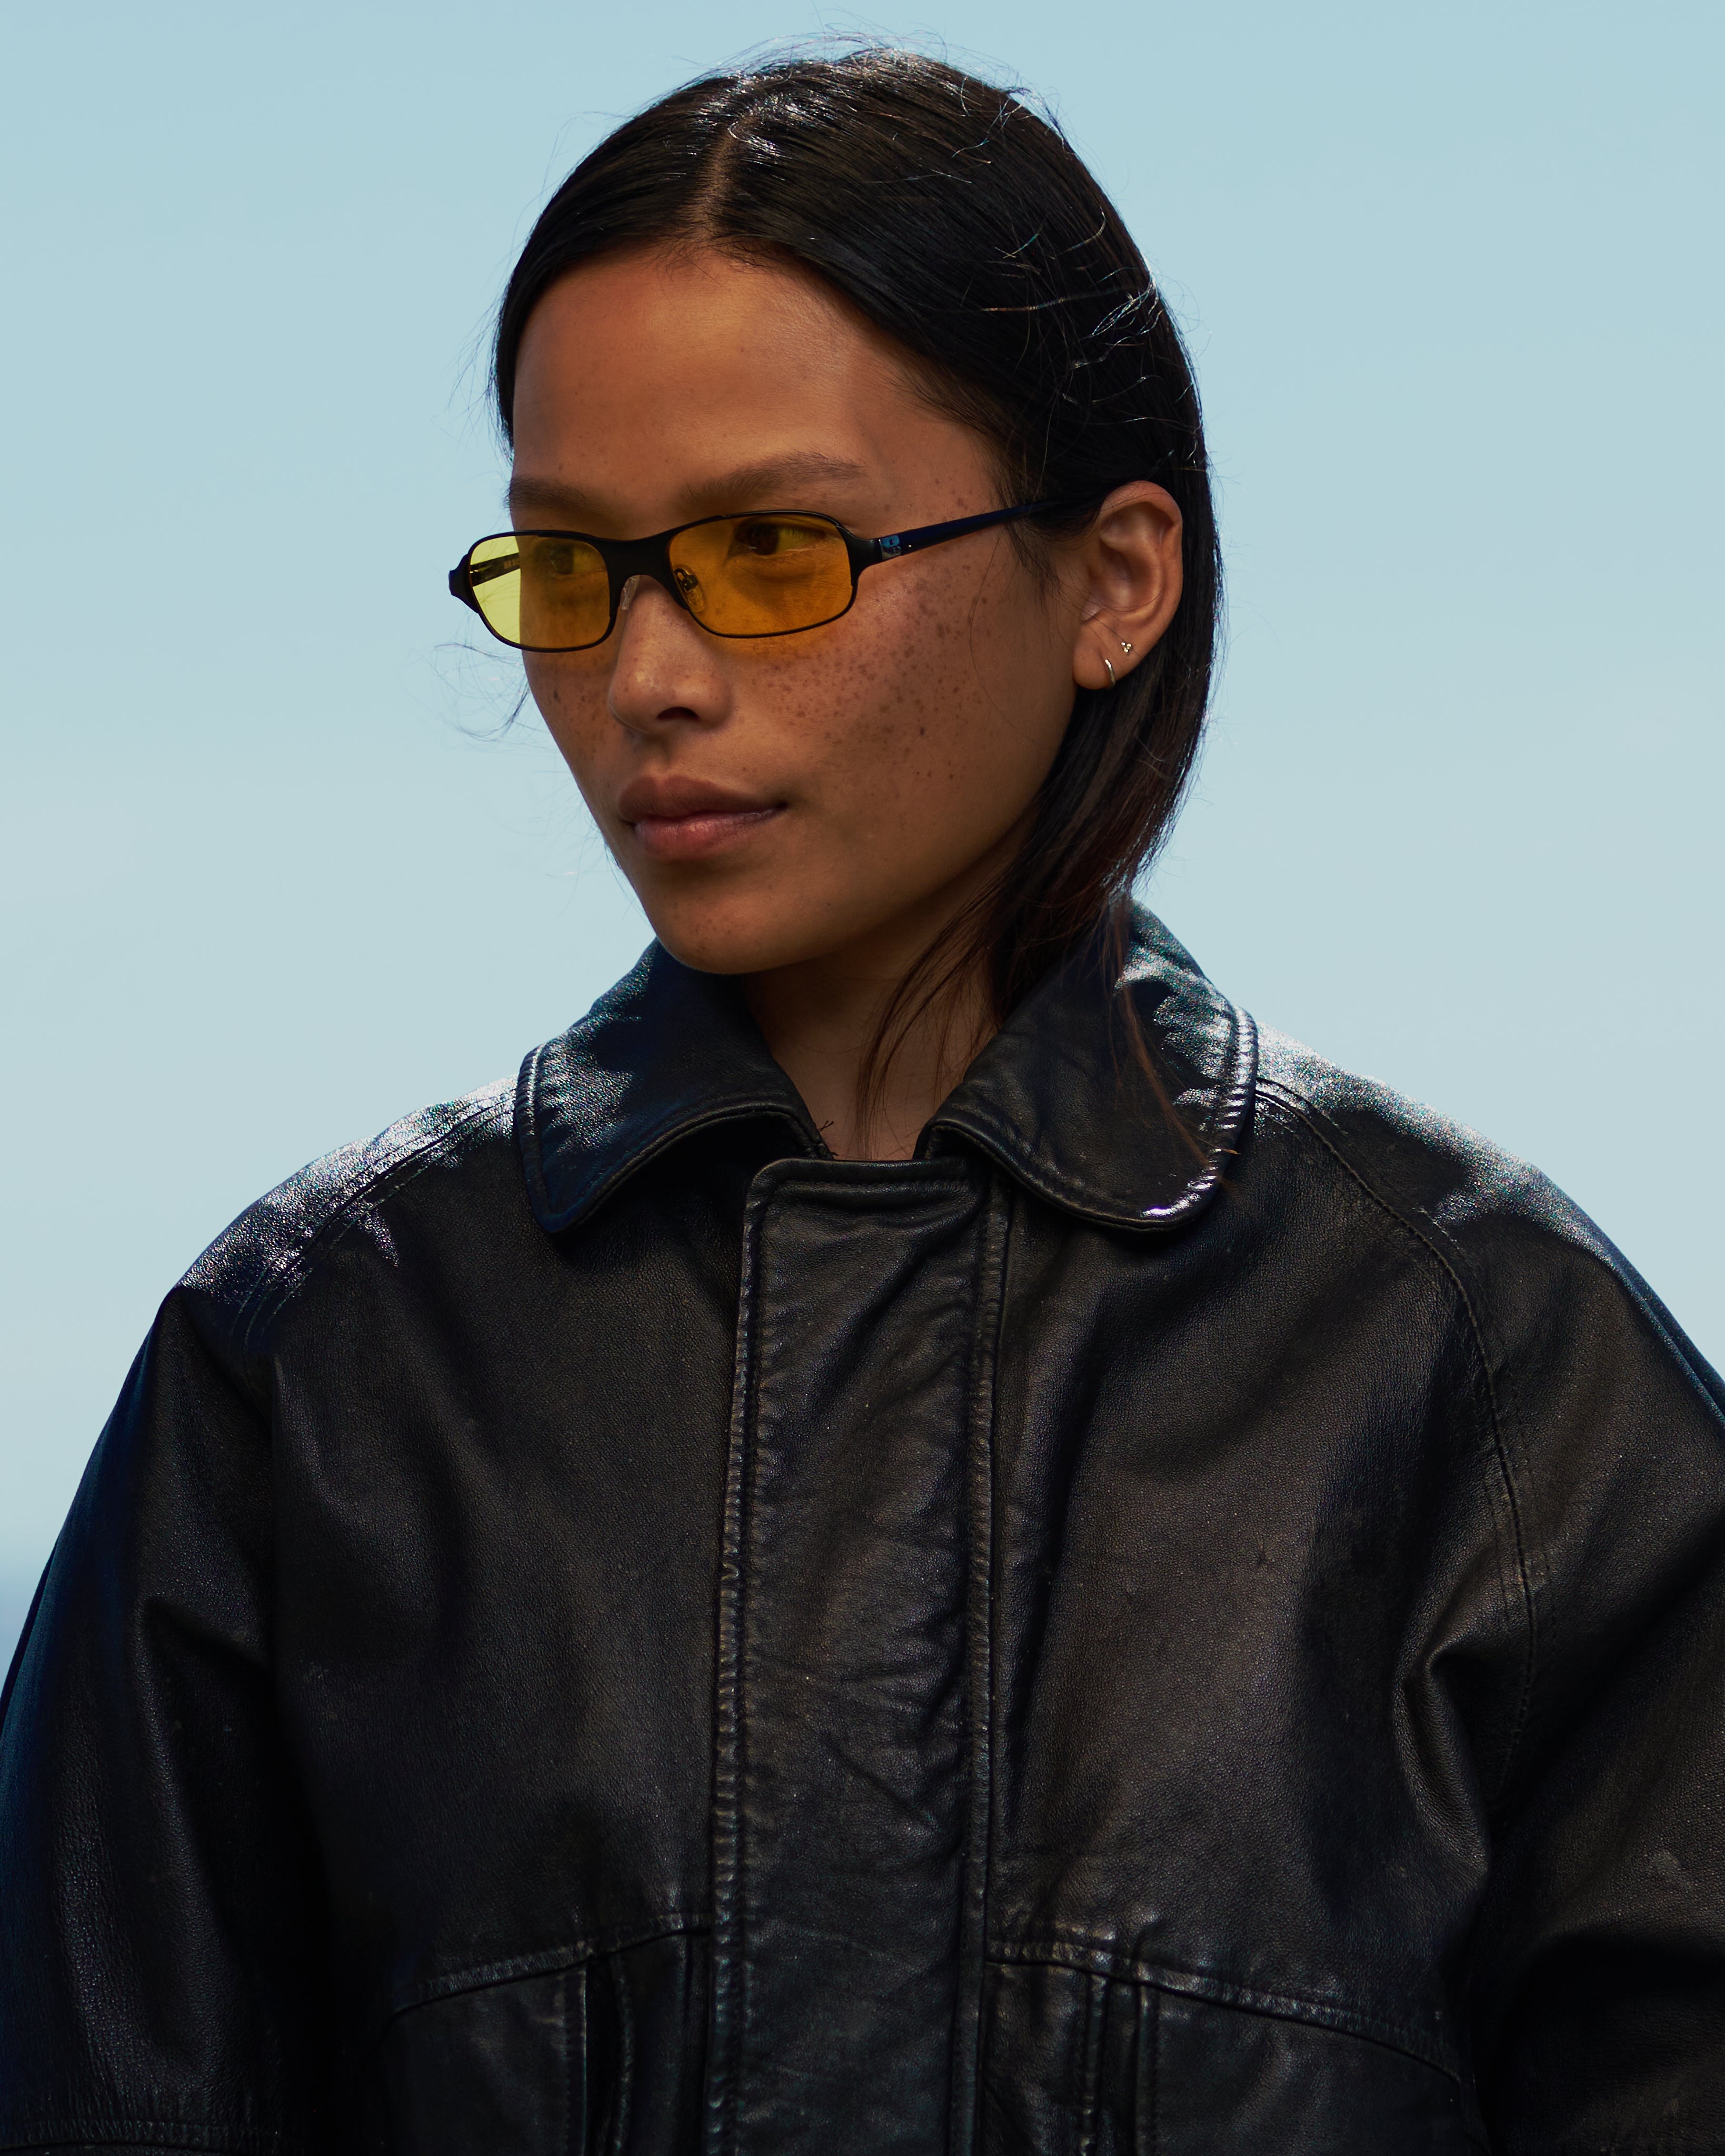 women with dark hair in 90s / 2000s small frame glasses with yellow lenses and a black frame